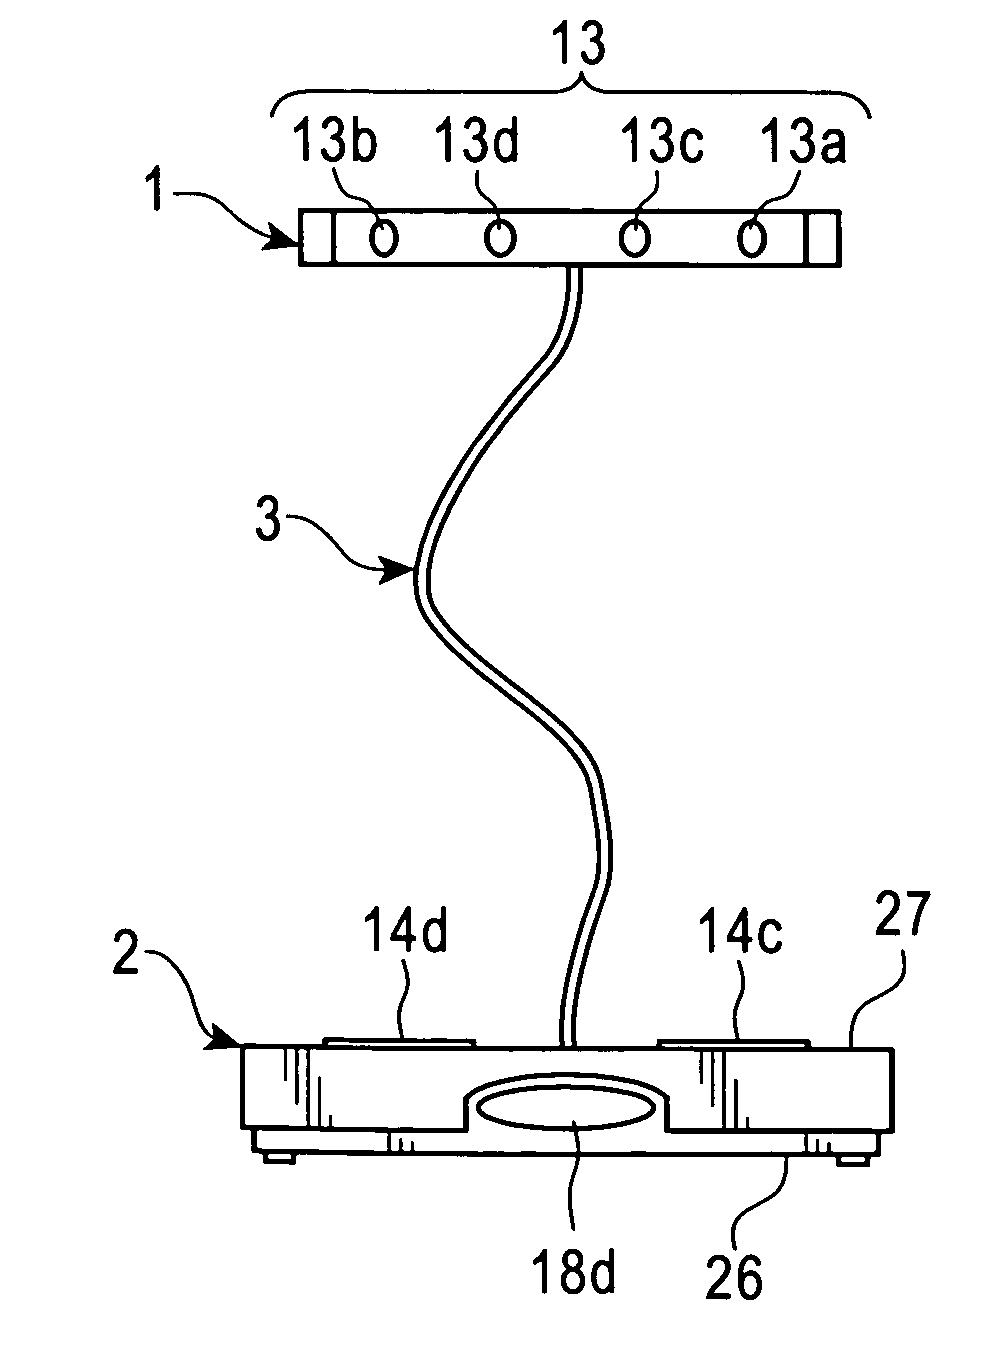 Abdominal impedance-based body composition measuring apparatus